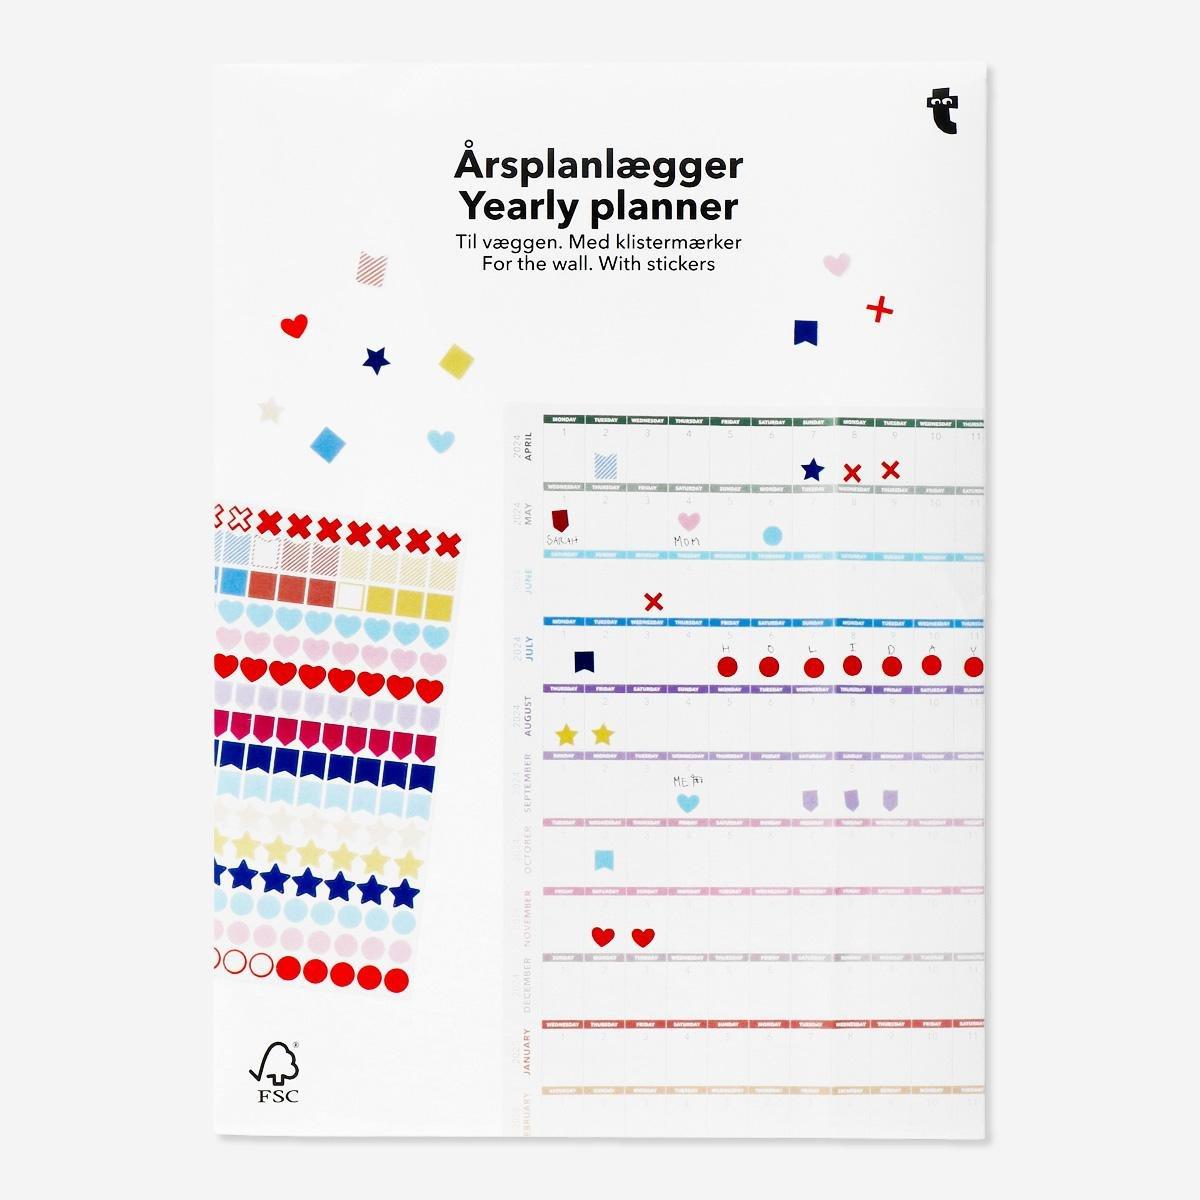 Yearly planner. For the wall